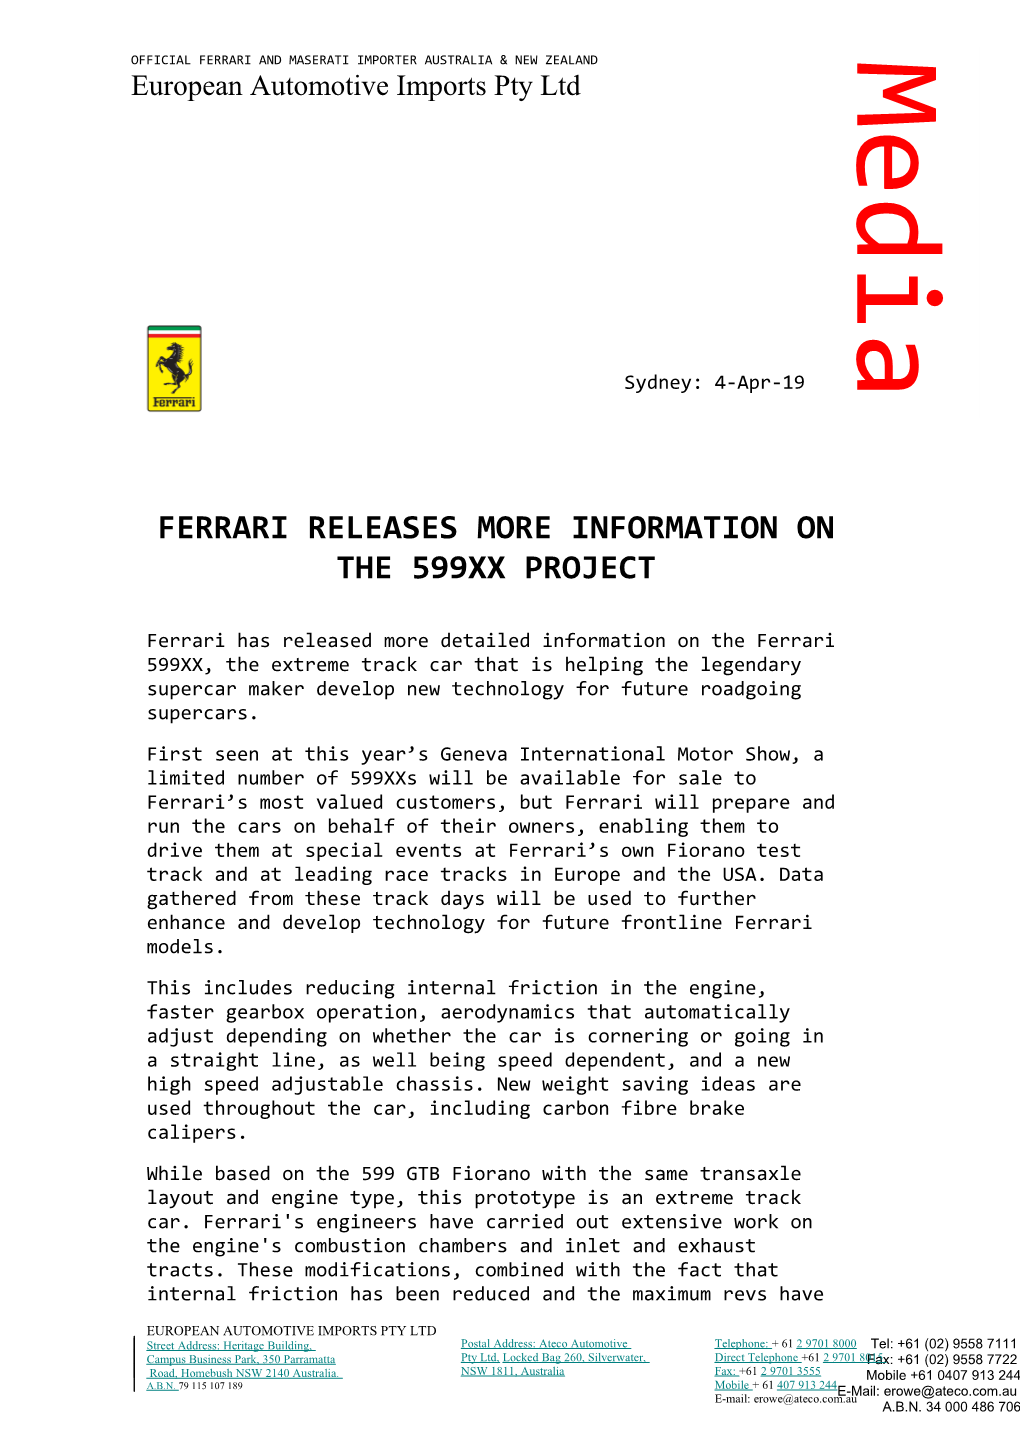 Ferrari Releases More Information on the 599Xx Project